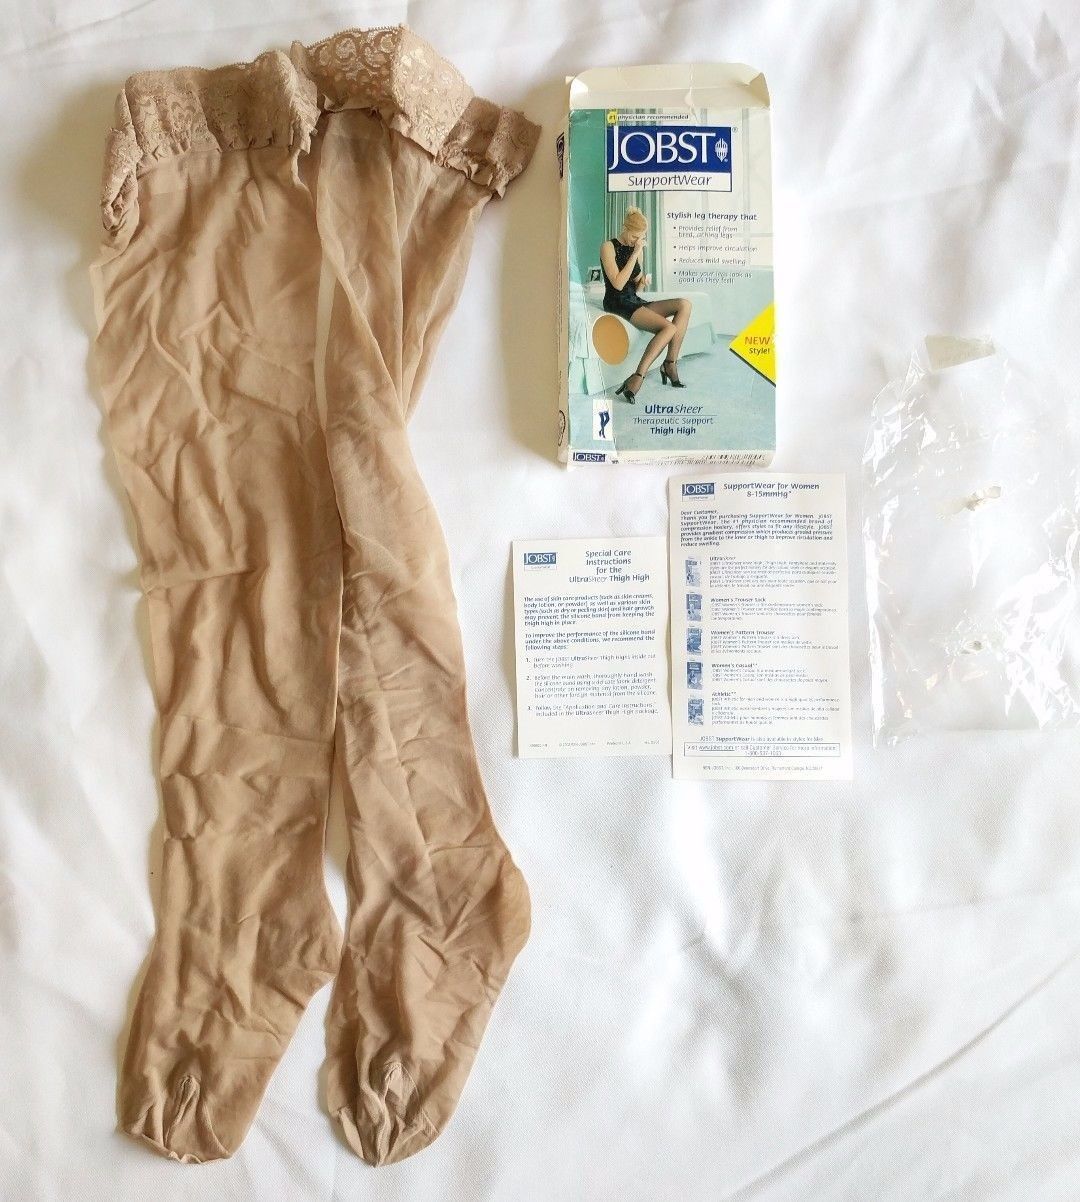 JOBST SUPPORT WEAR MEDICAL Leg Therapy Compression Thigh High XL 8-15 mmHg Beige - $34.95